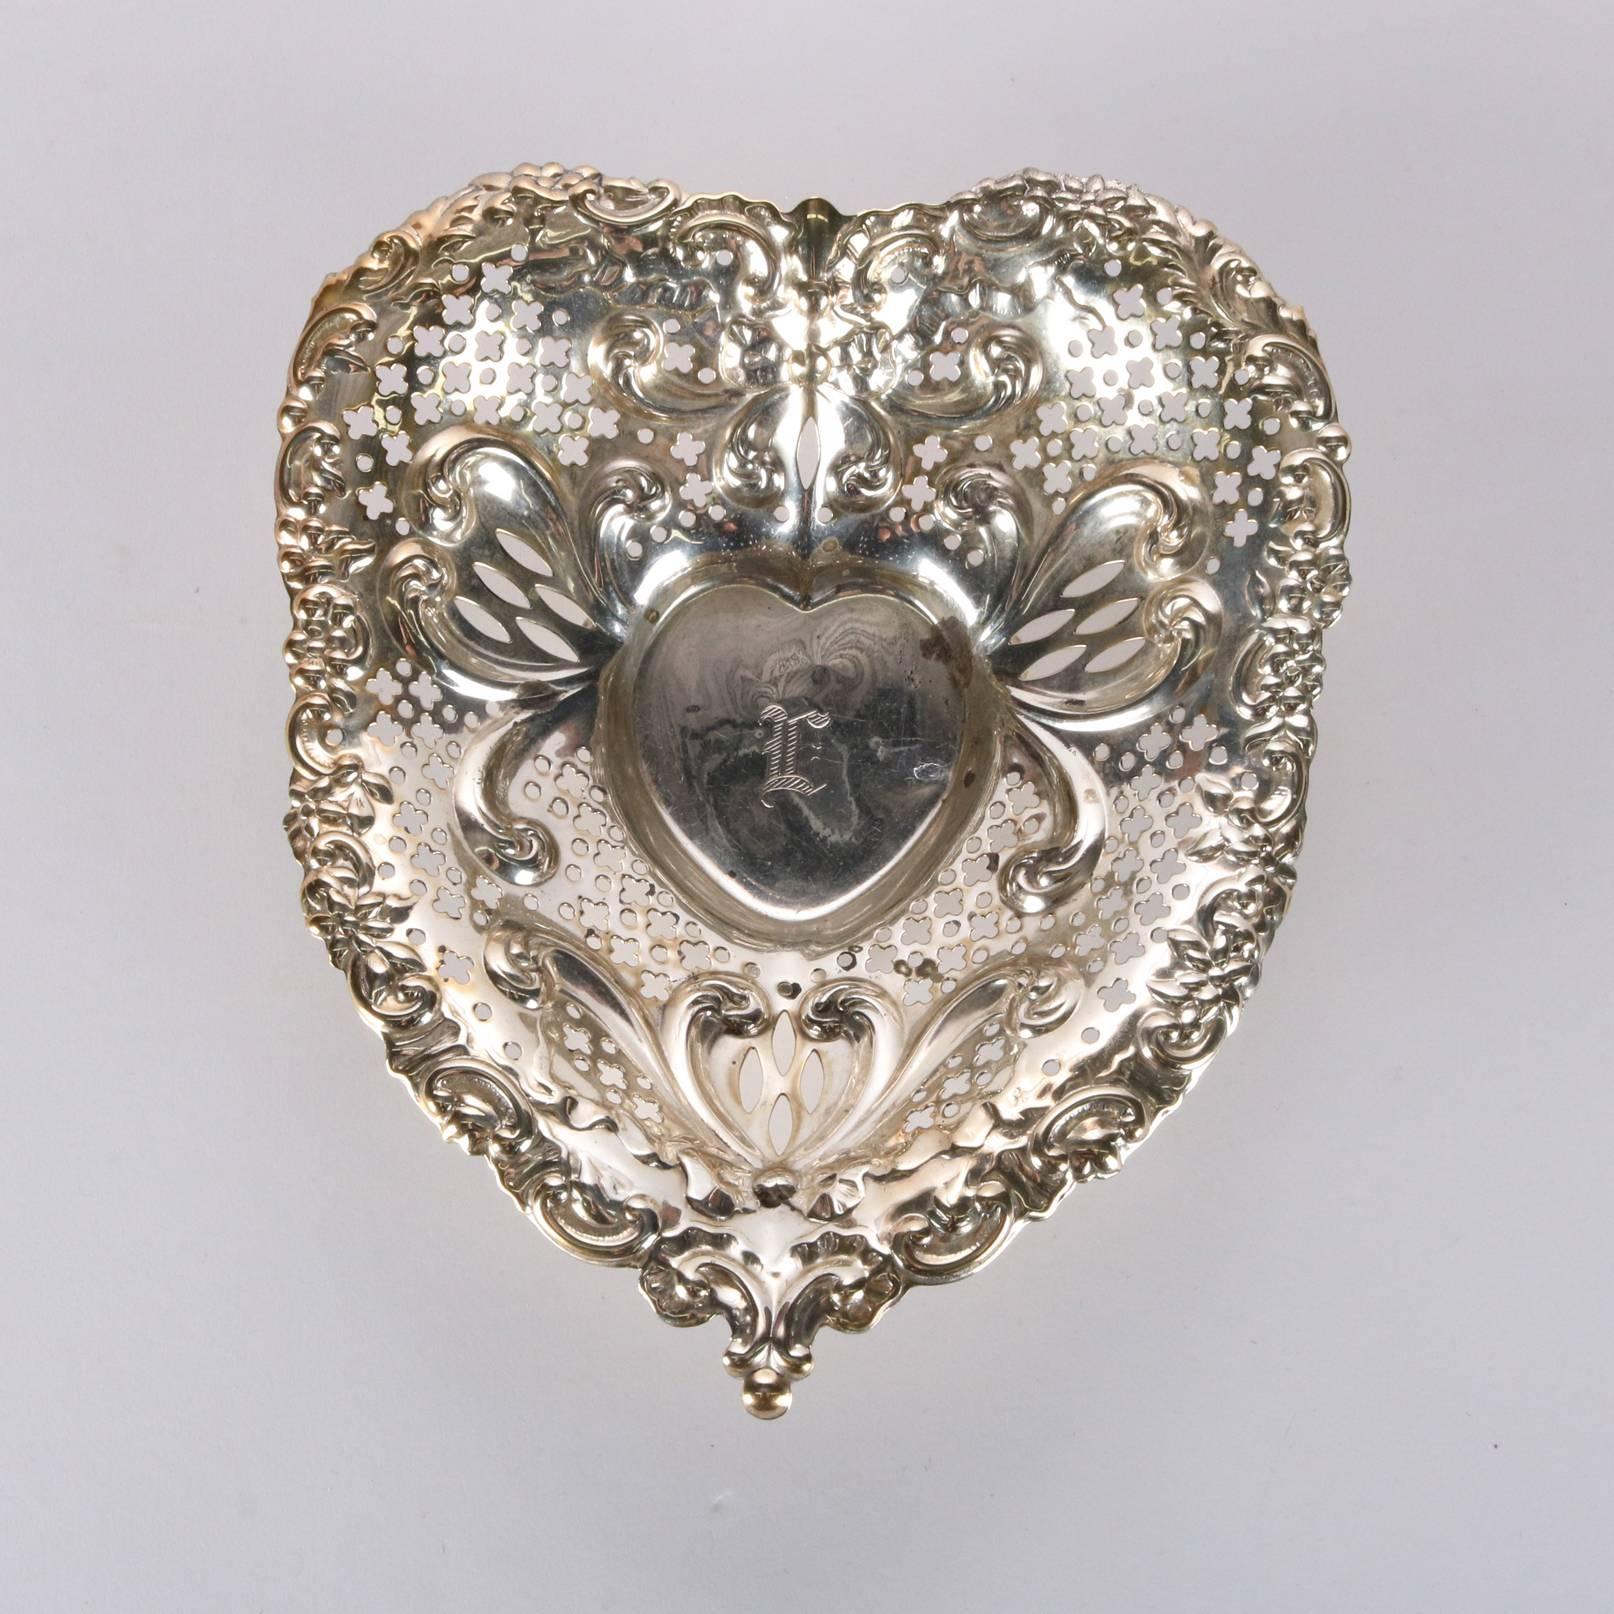 Antique Sterling Silver Gorham Heart Shaped Reticulated and Footed Dish 1